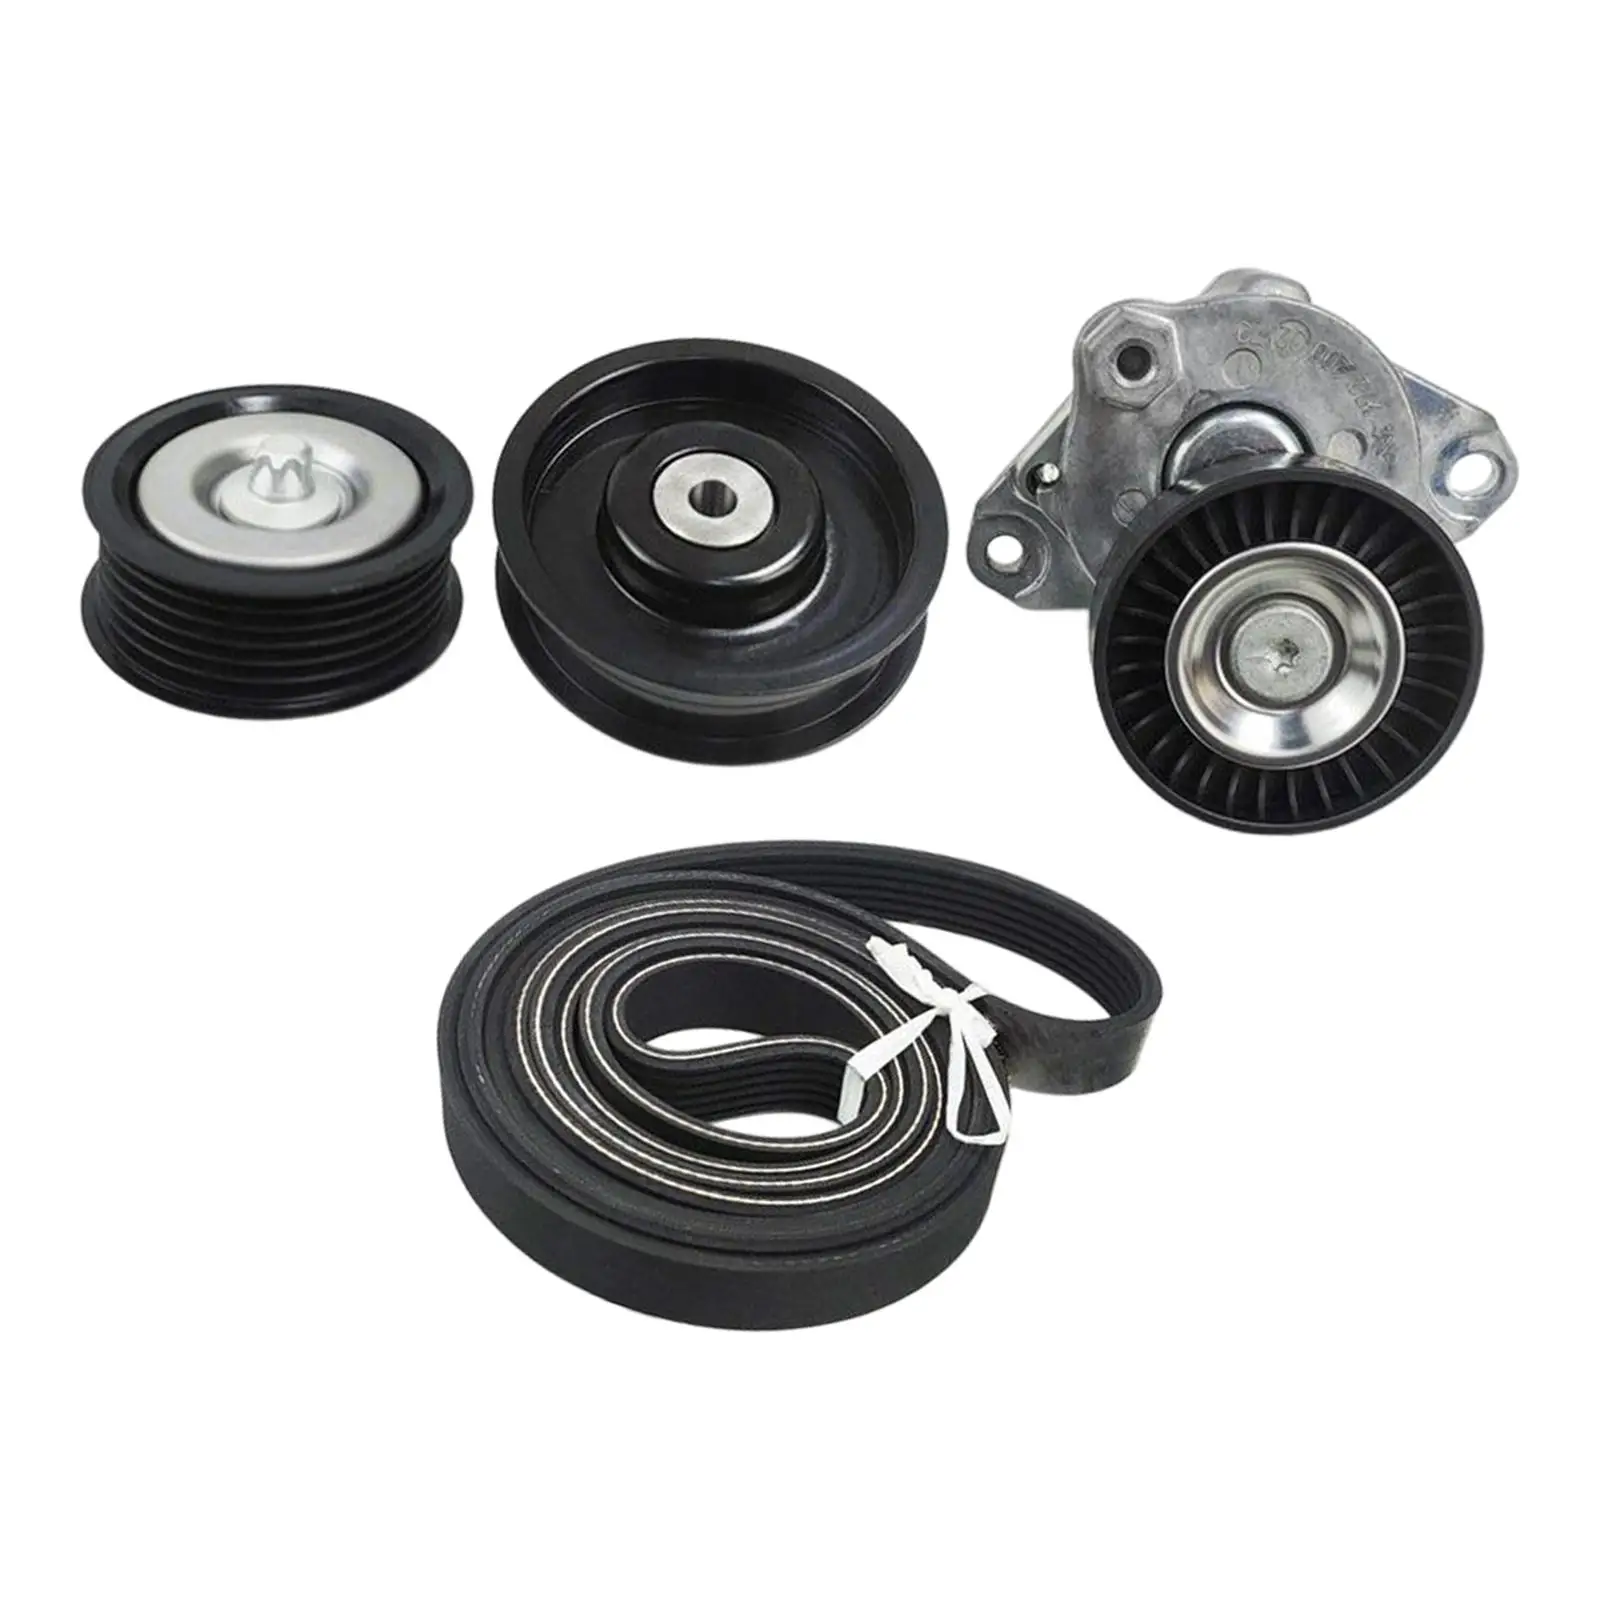 Drive Belt Tensioner & Idler Pulley A2722000270 Repair Parts for C230 C280 C300